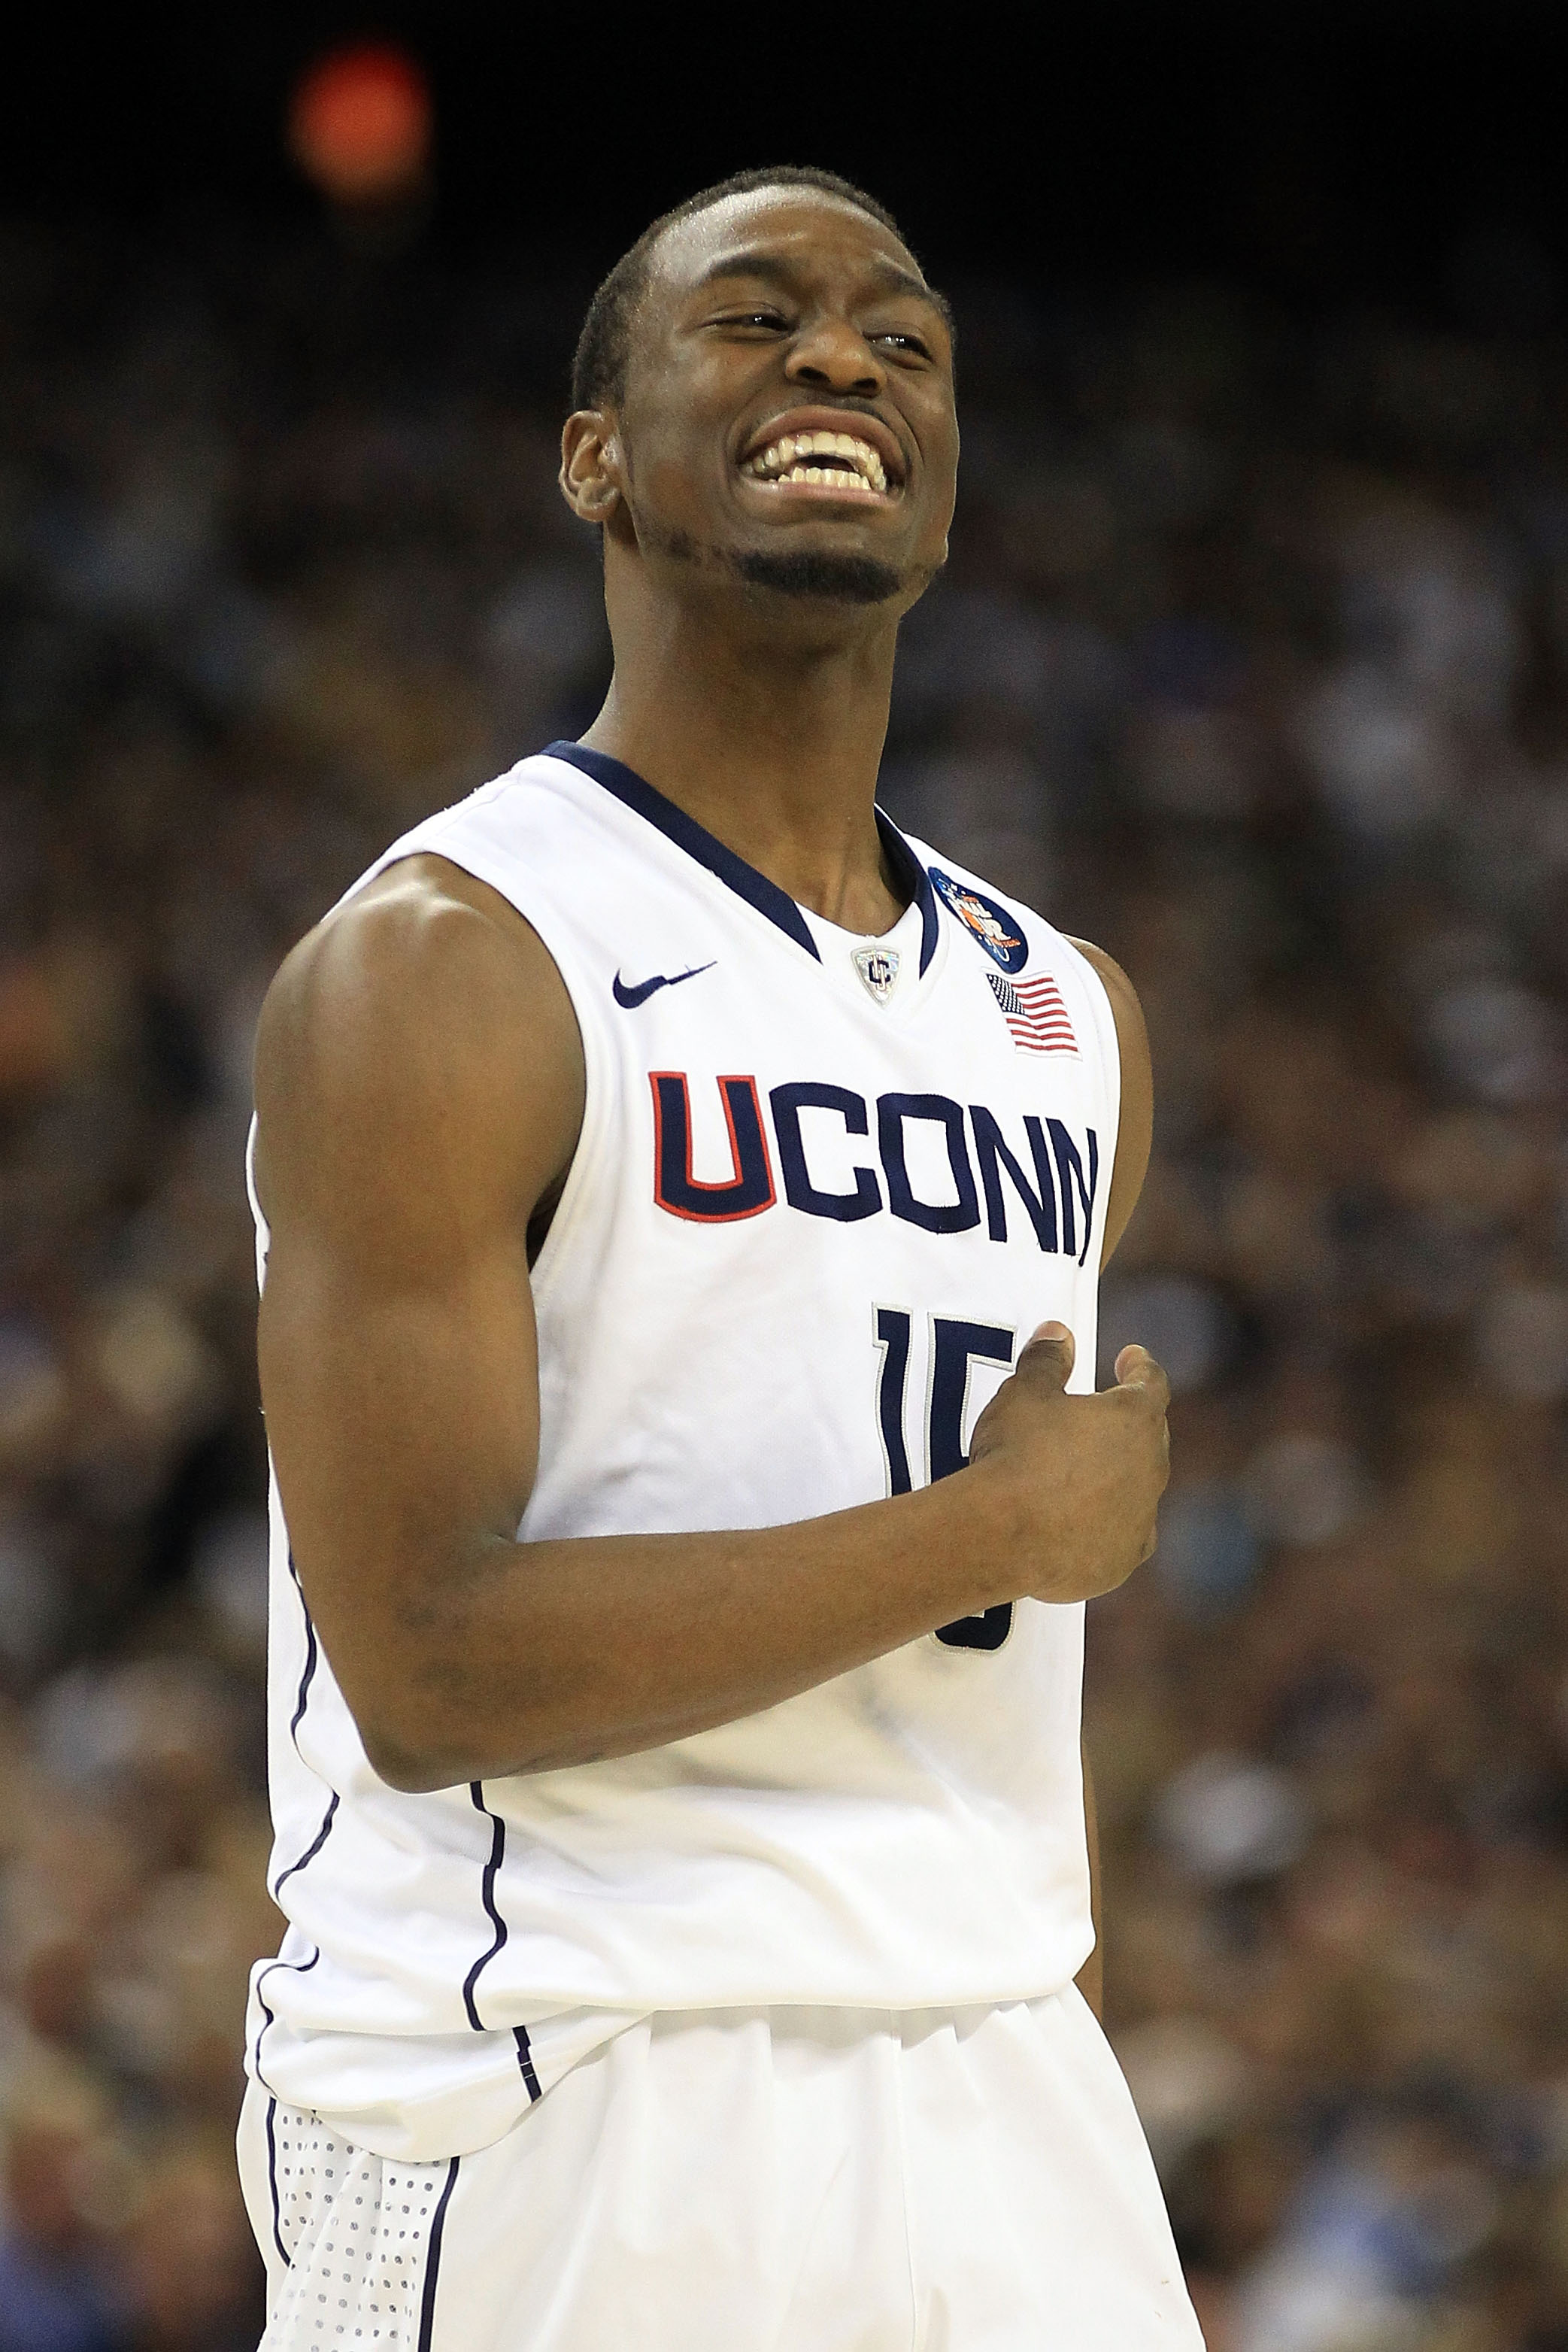 HOUSTON, TX - APRIL 04:  Kemba Walker #15 of the Connecticut Huskies reacts after a play against the Butler Bulldogs during the National Championship Game of the 2011 NCAA Division I Men's Basketball Tournament at Reliant Stadium on April 4, 2011 in Houst